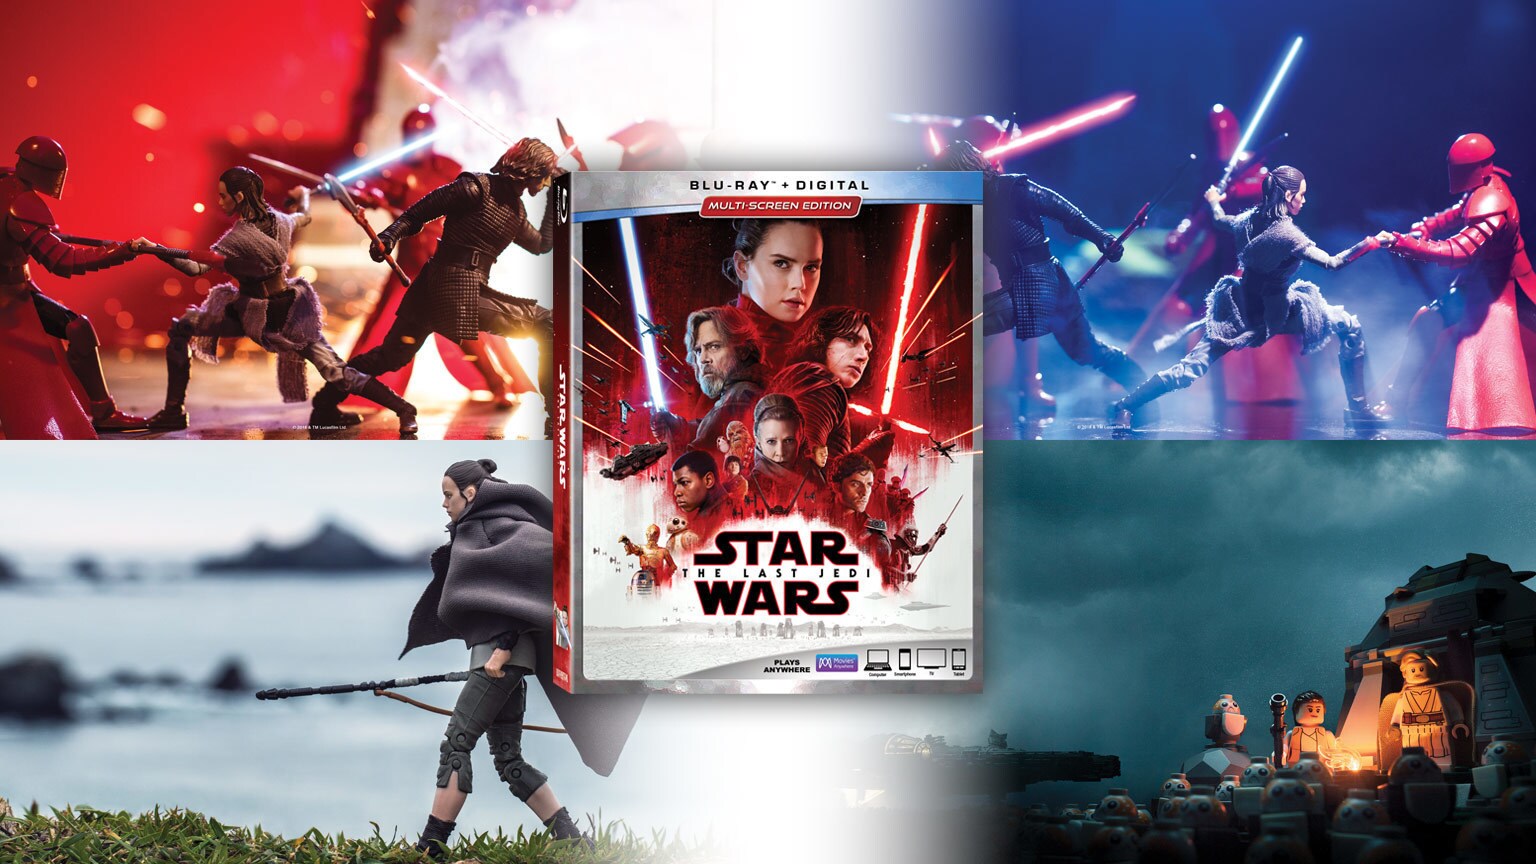 Happy Beeps: Download and Print StarWars.com Exclusive Star Wars: The Last Jedi Blu-ray Covers